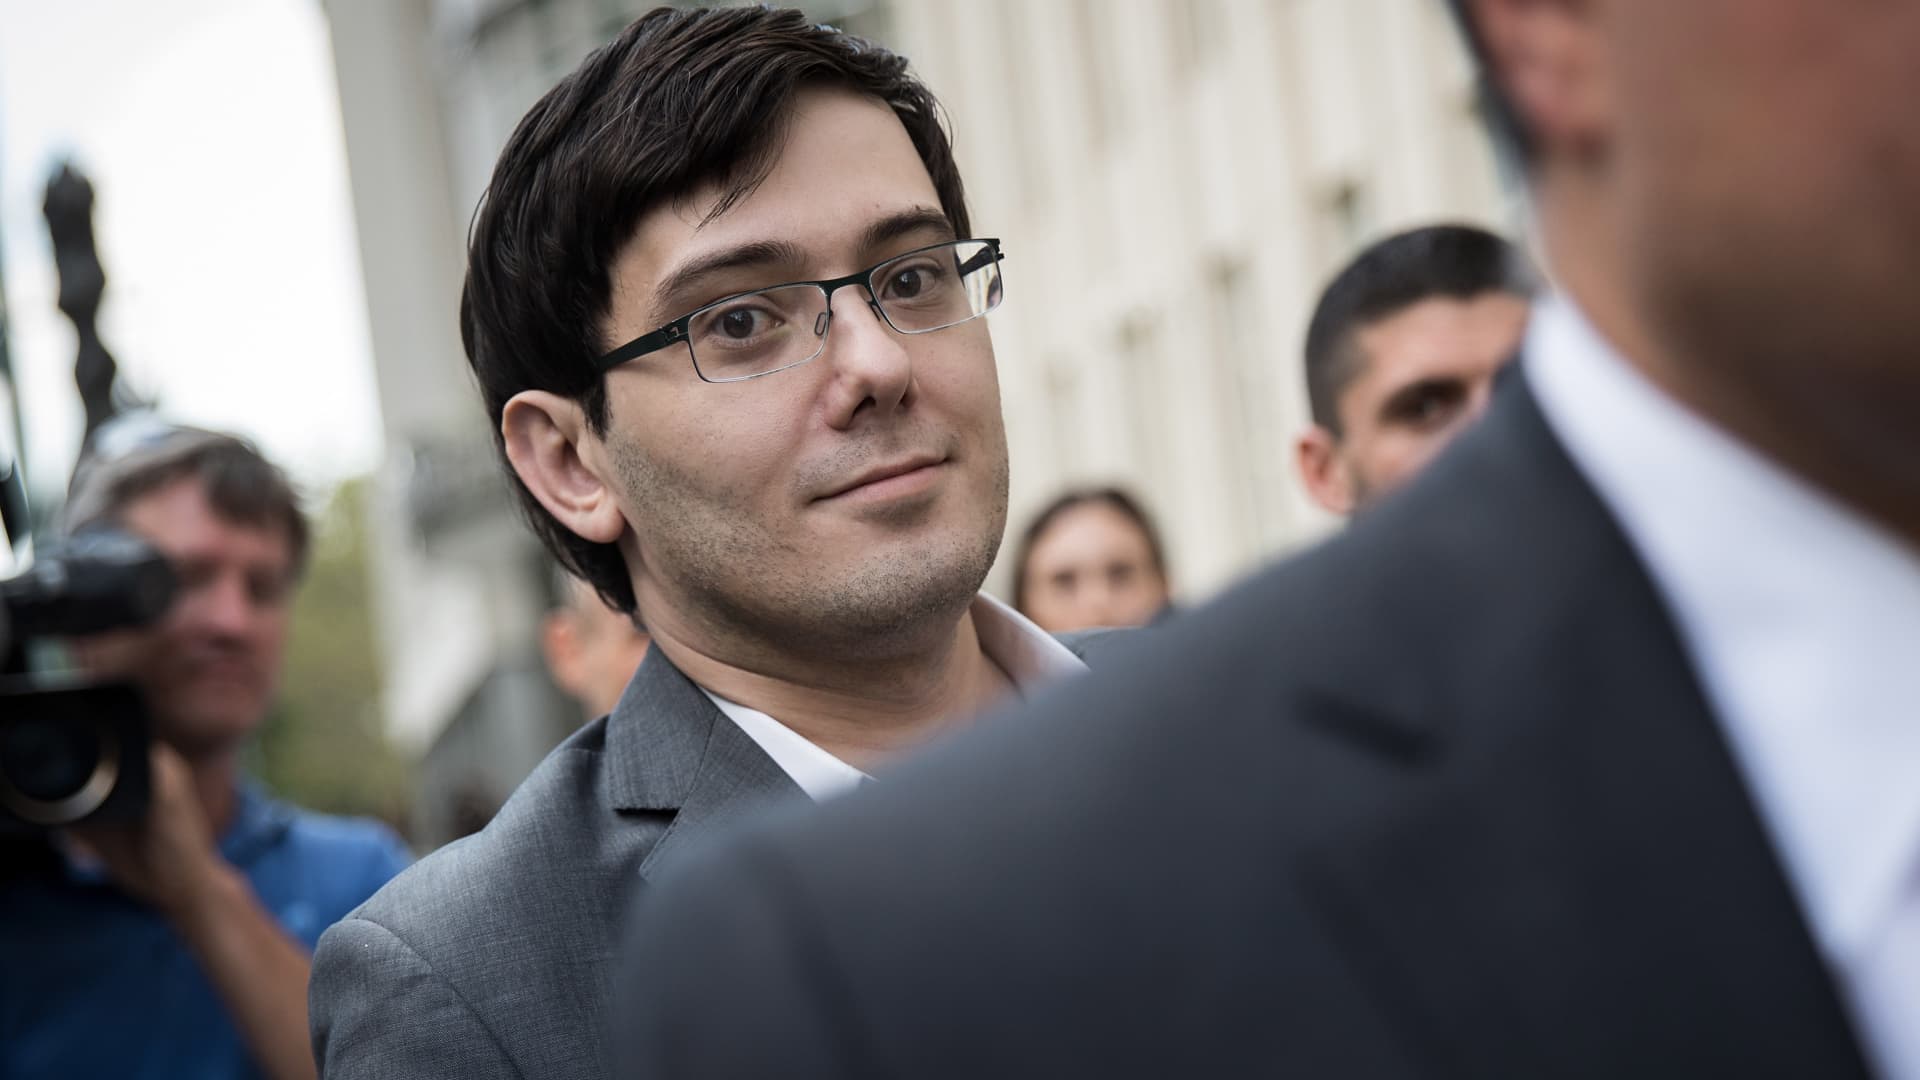 ‘Pharma bro’ Martin Shkreli released from federal prison and into New York halfw..